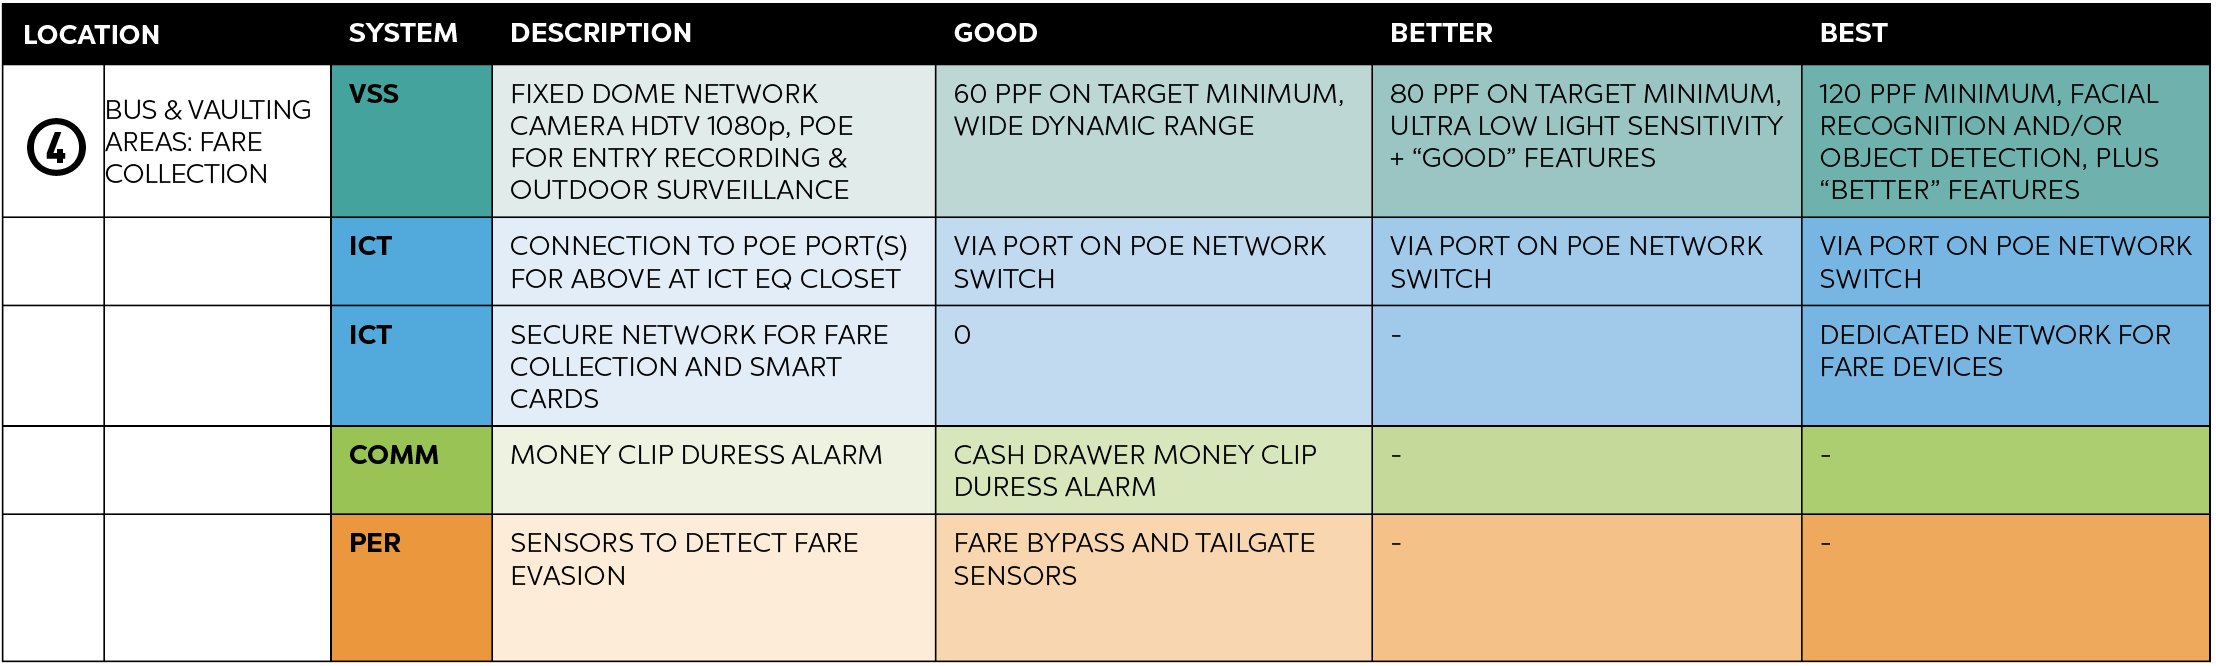 Good, Better and Best system recommendations for bus and vaulting area fare collection, including specifications for video surveillance, ICT, communications and perimeter systems. To view the guidance with all graphs and charts, please download the full PDF.